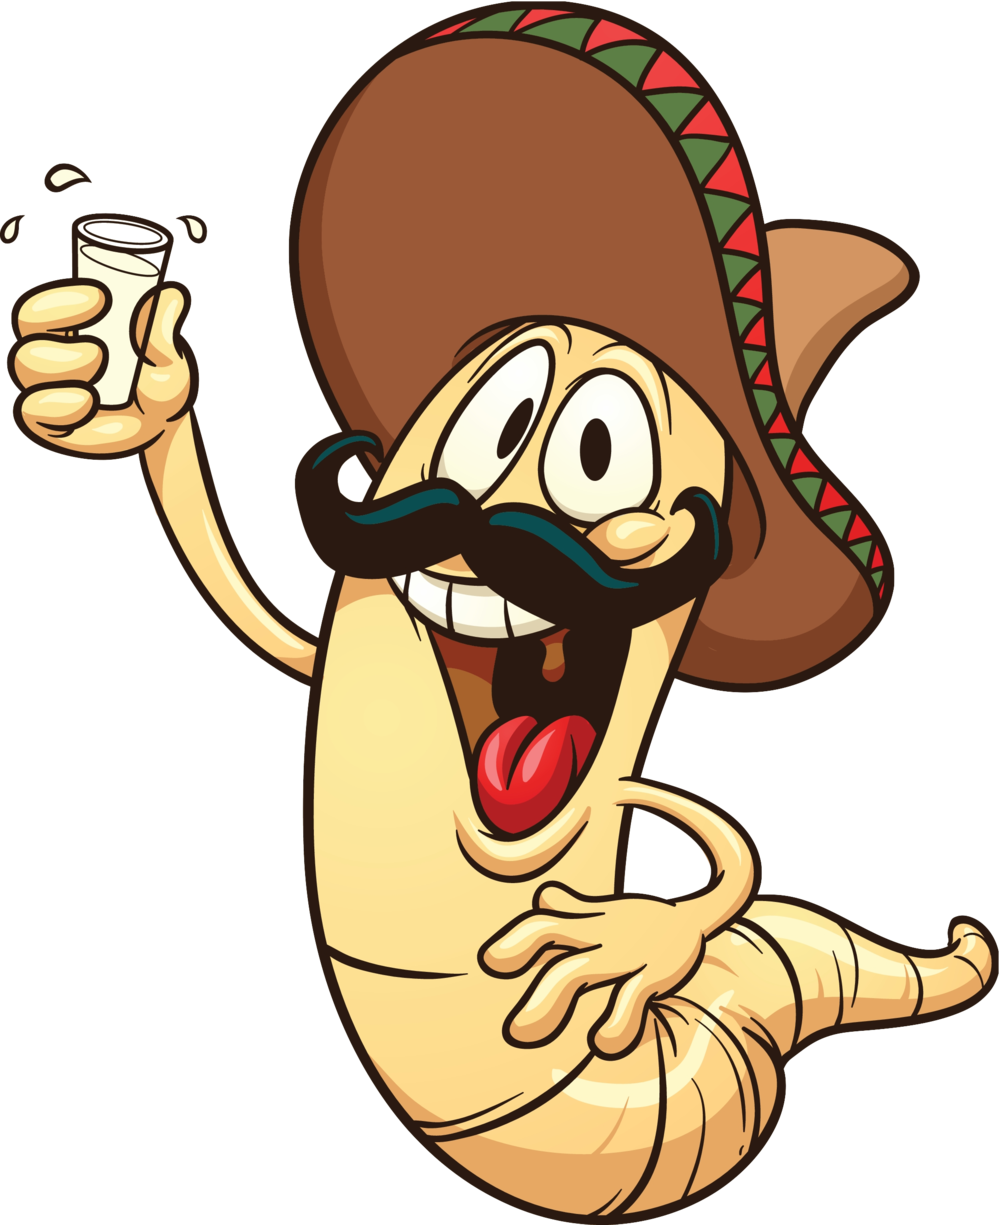 Worm clipart character. Tequila mexican cuisine mezcal